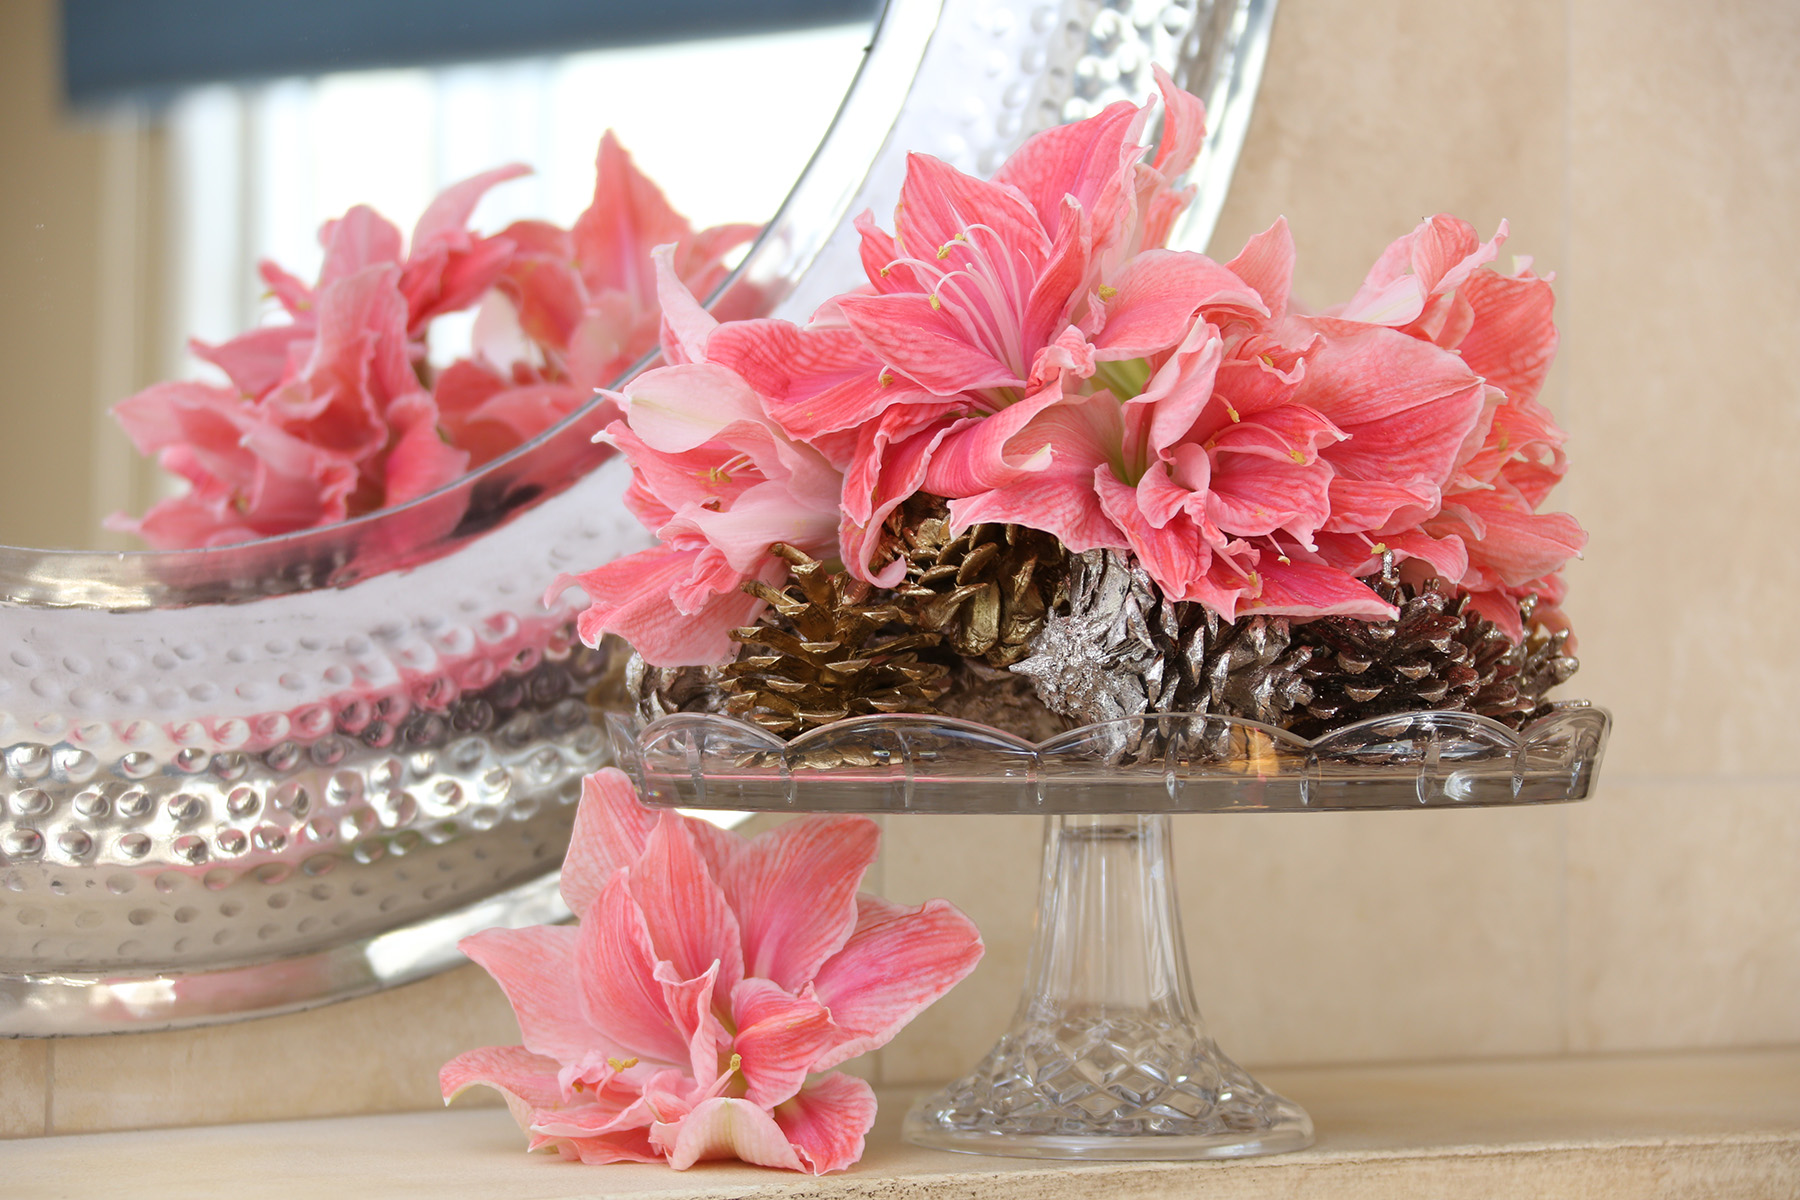 For a stunning mantle, decorate with cut amaryllis from Longfield Gardens